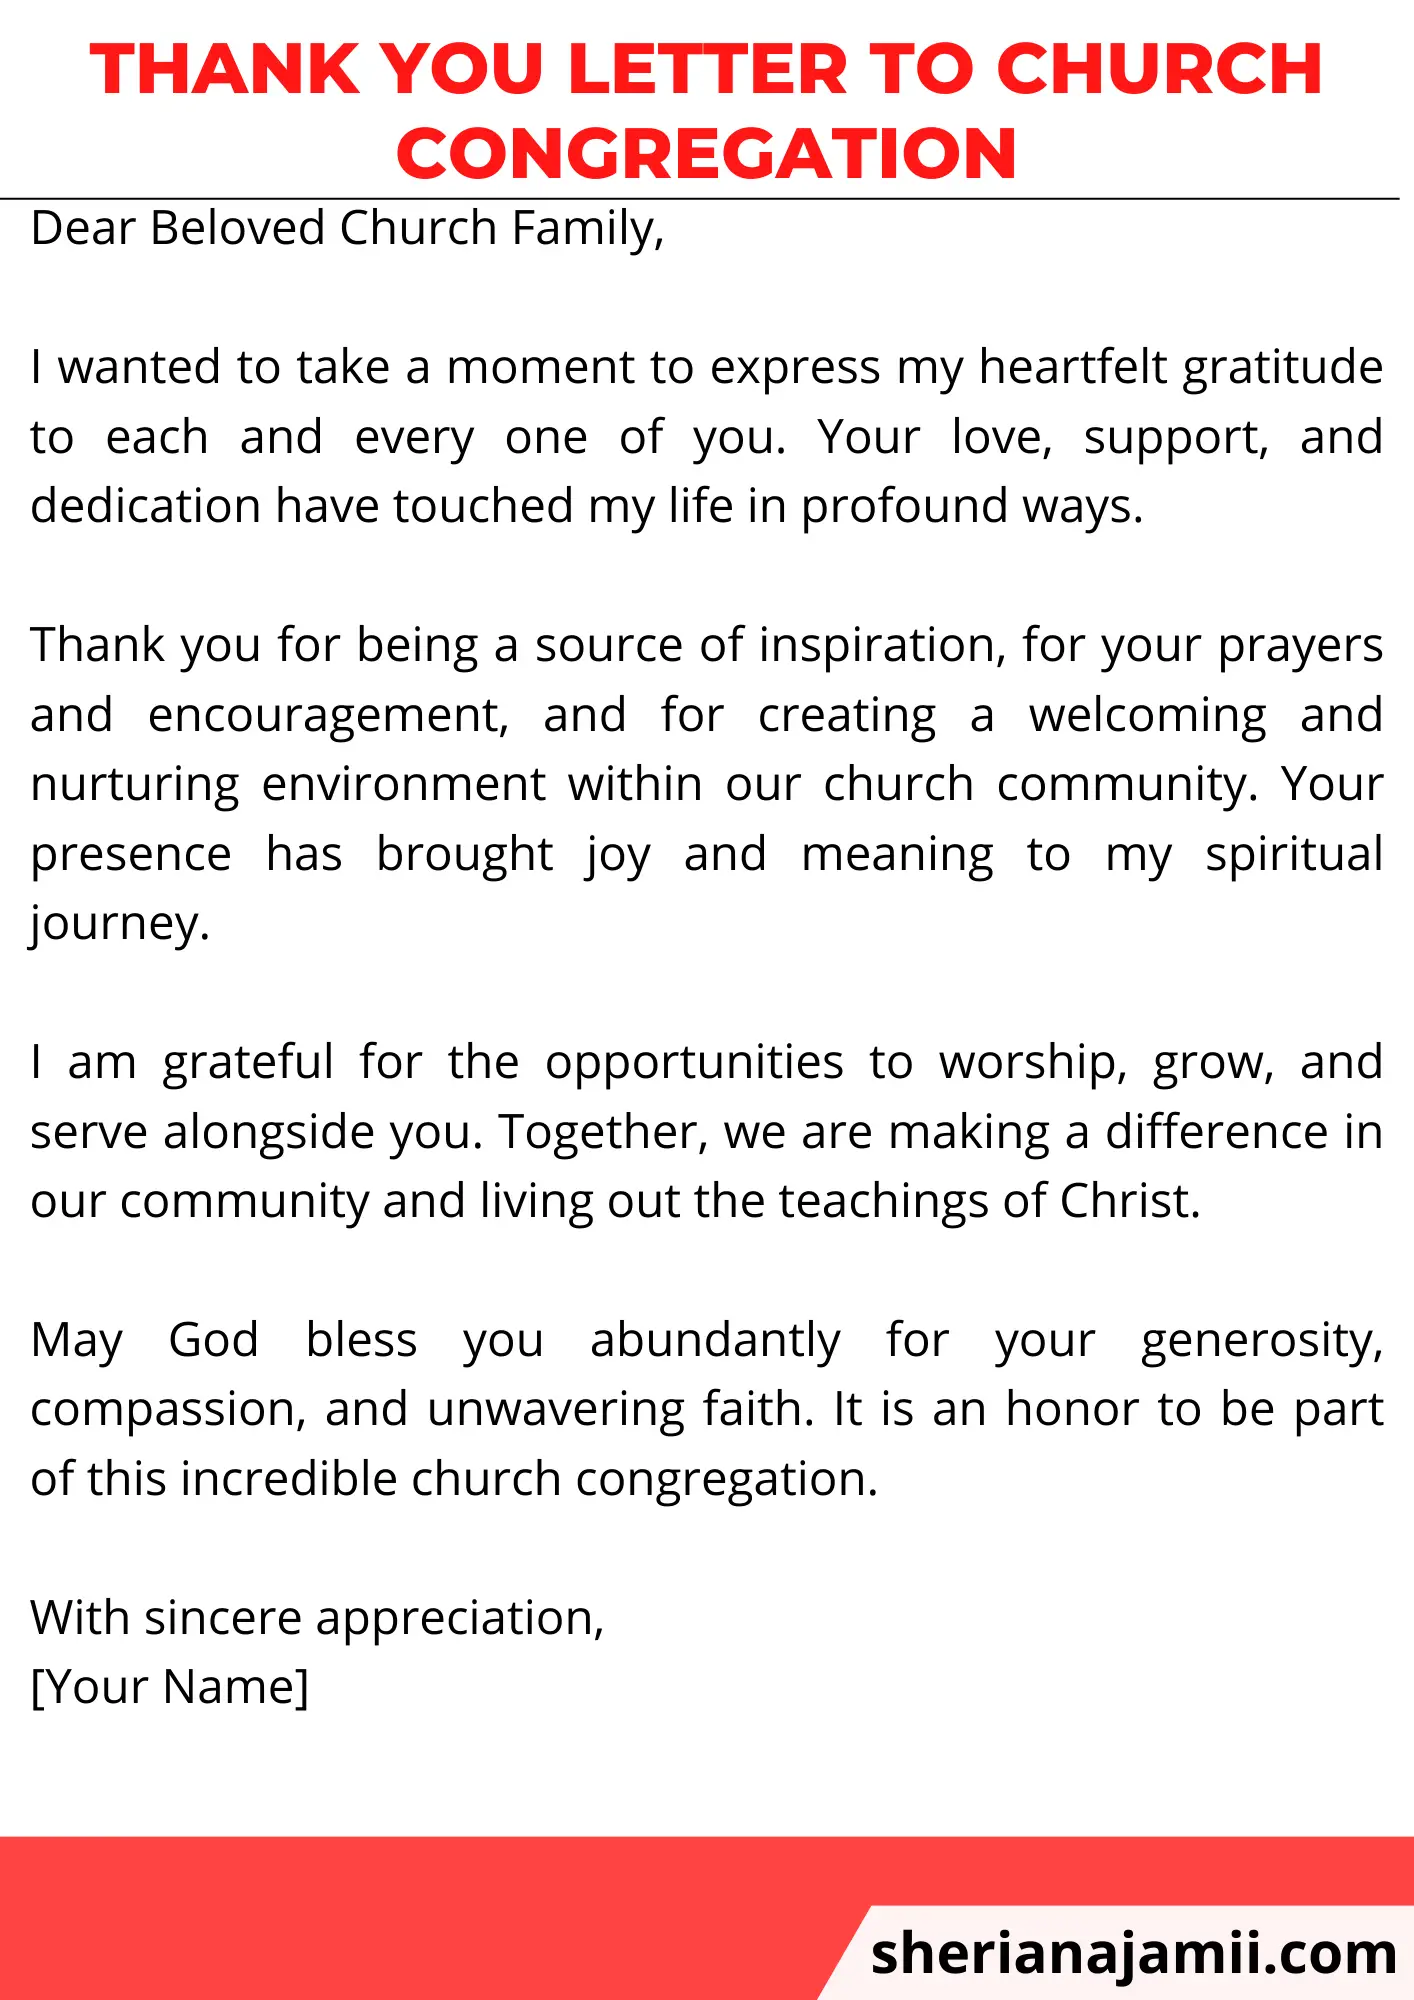 Thank you letter to church congregation